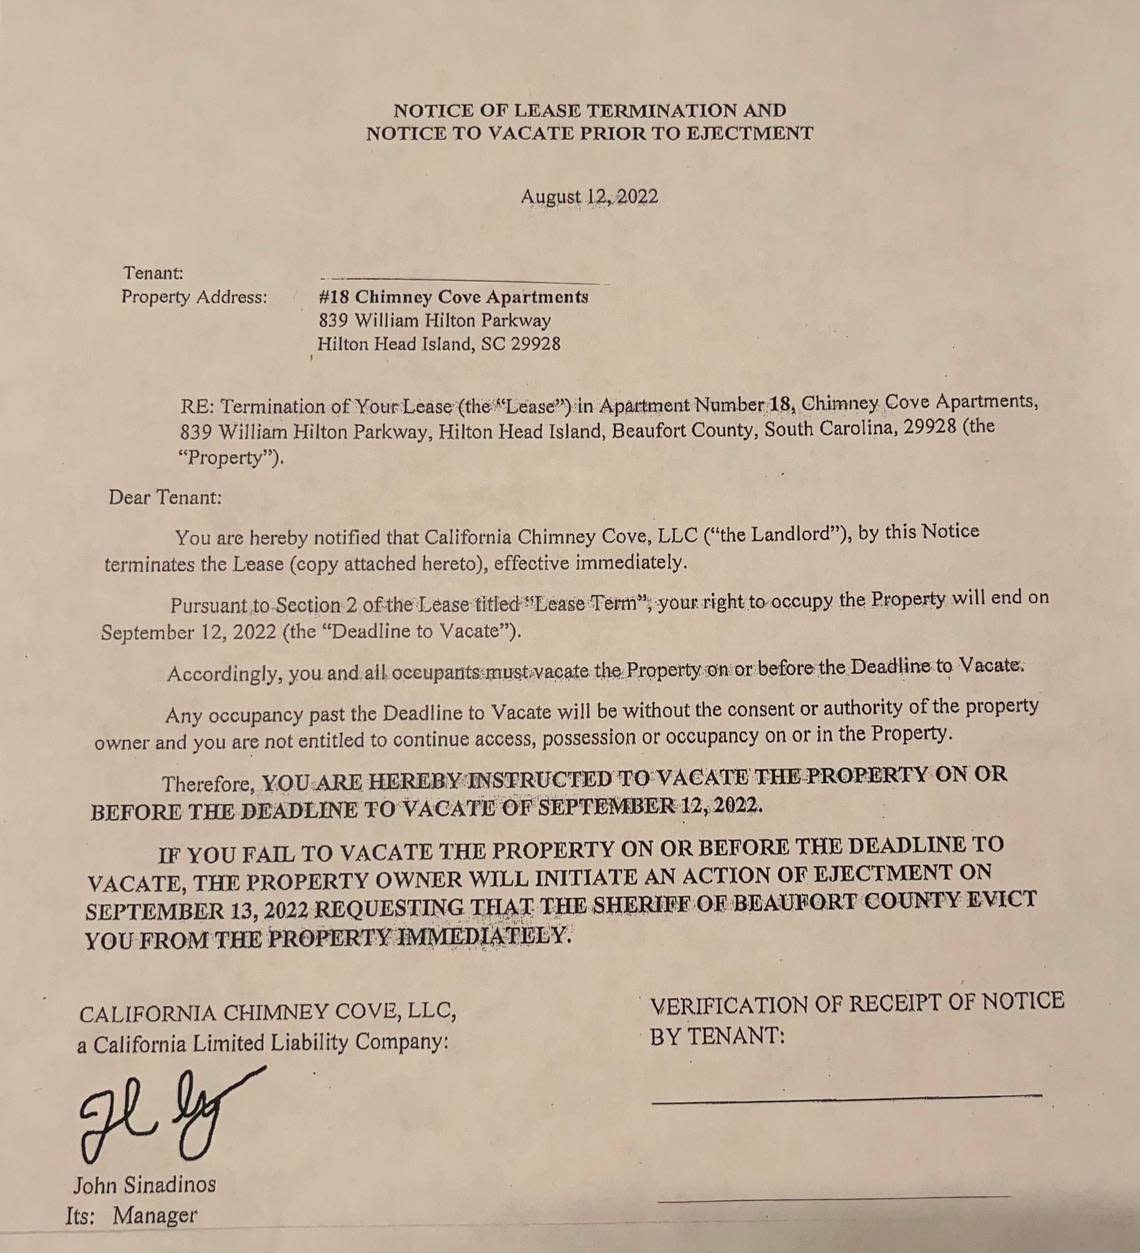 Chimney Cove residents came home on Aug. 12 to eviction notices like this one taped to their door telling them that they have 30 days to vacate the property. Sandy Gillis